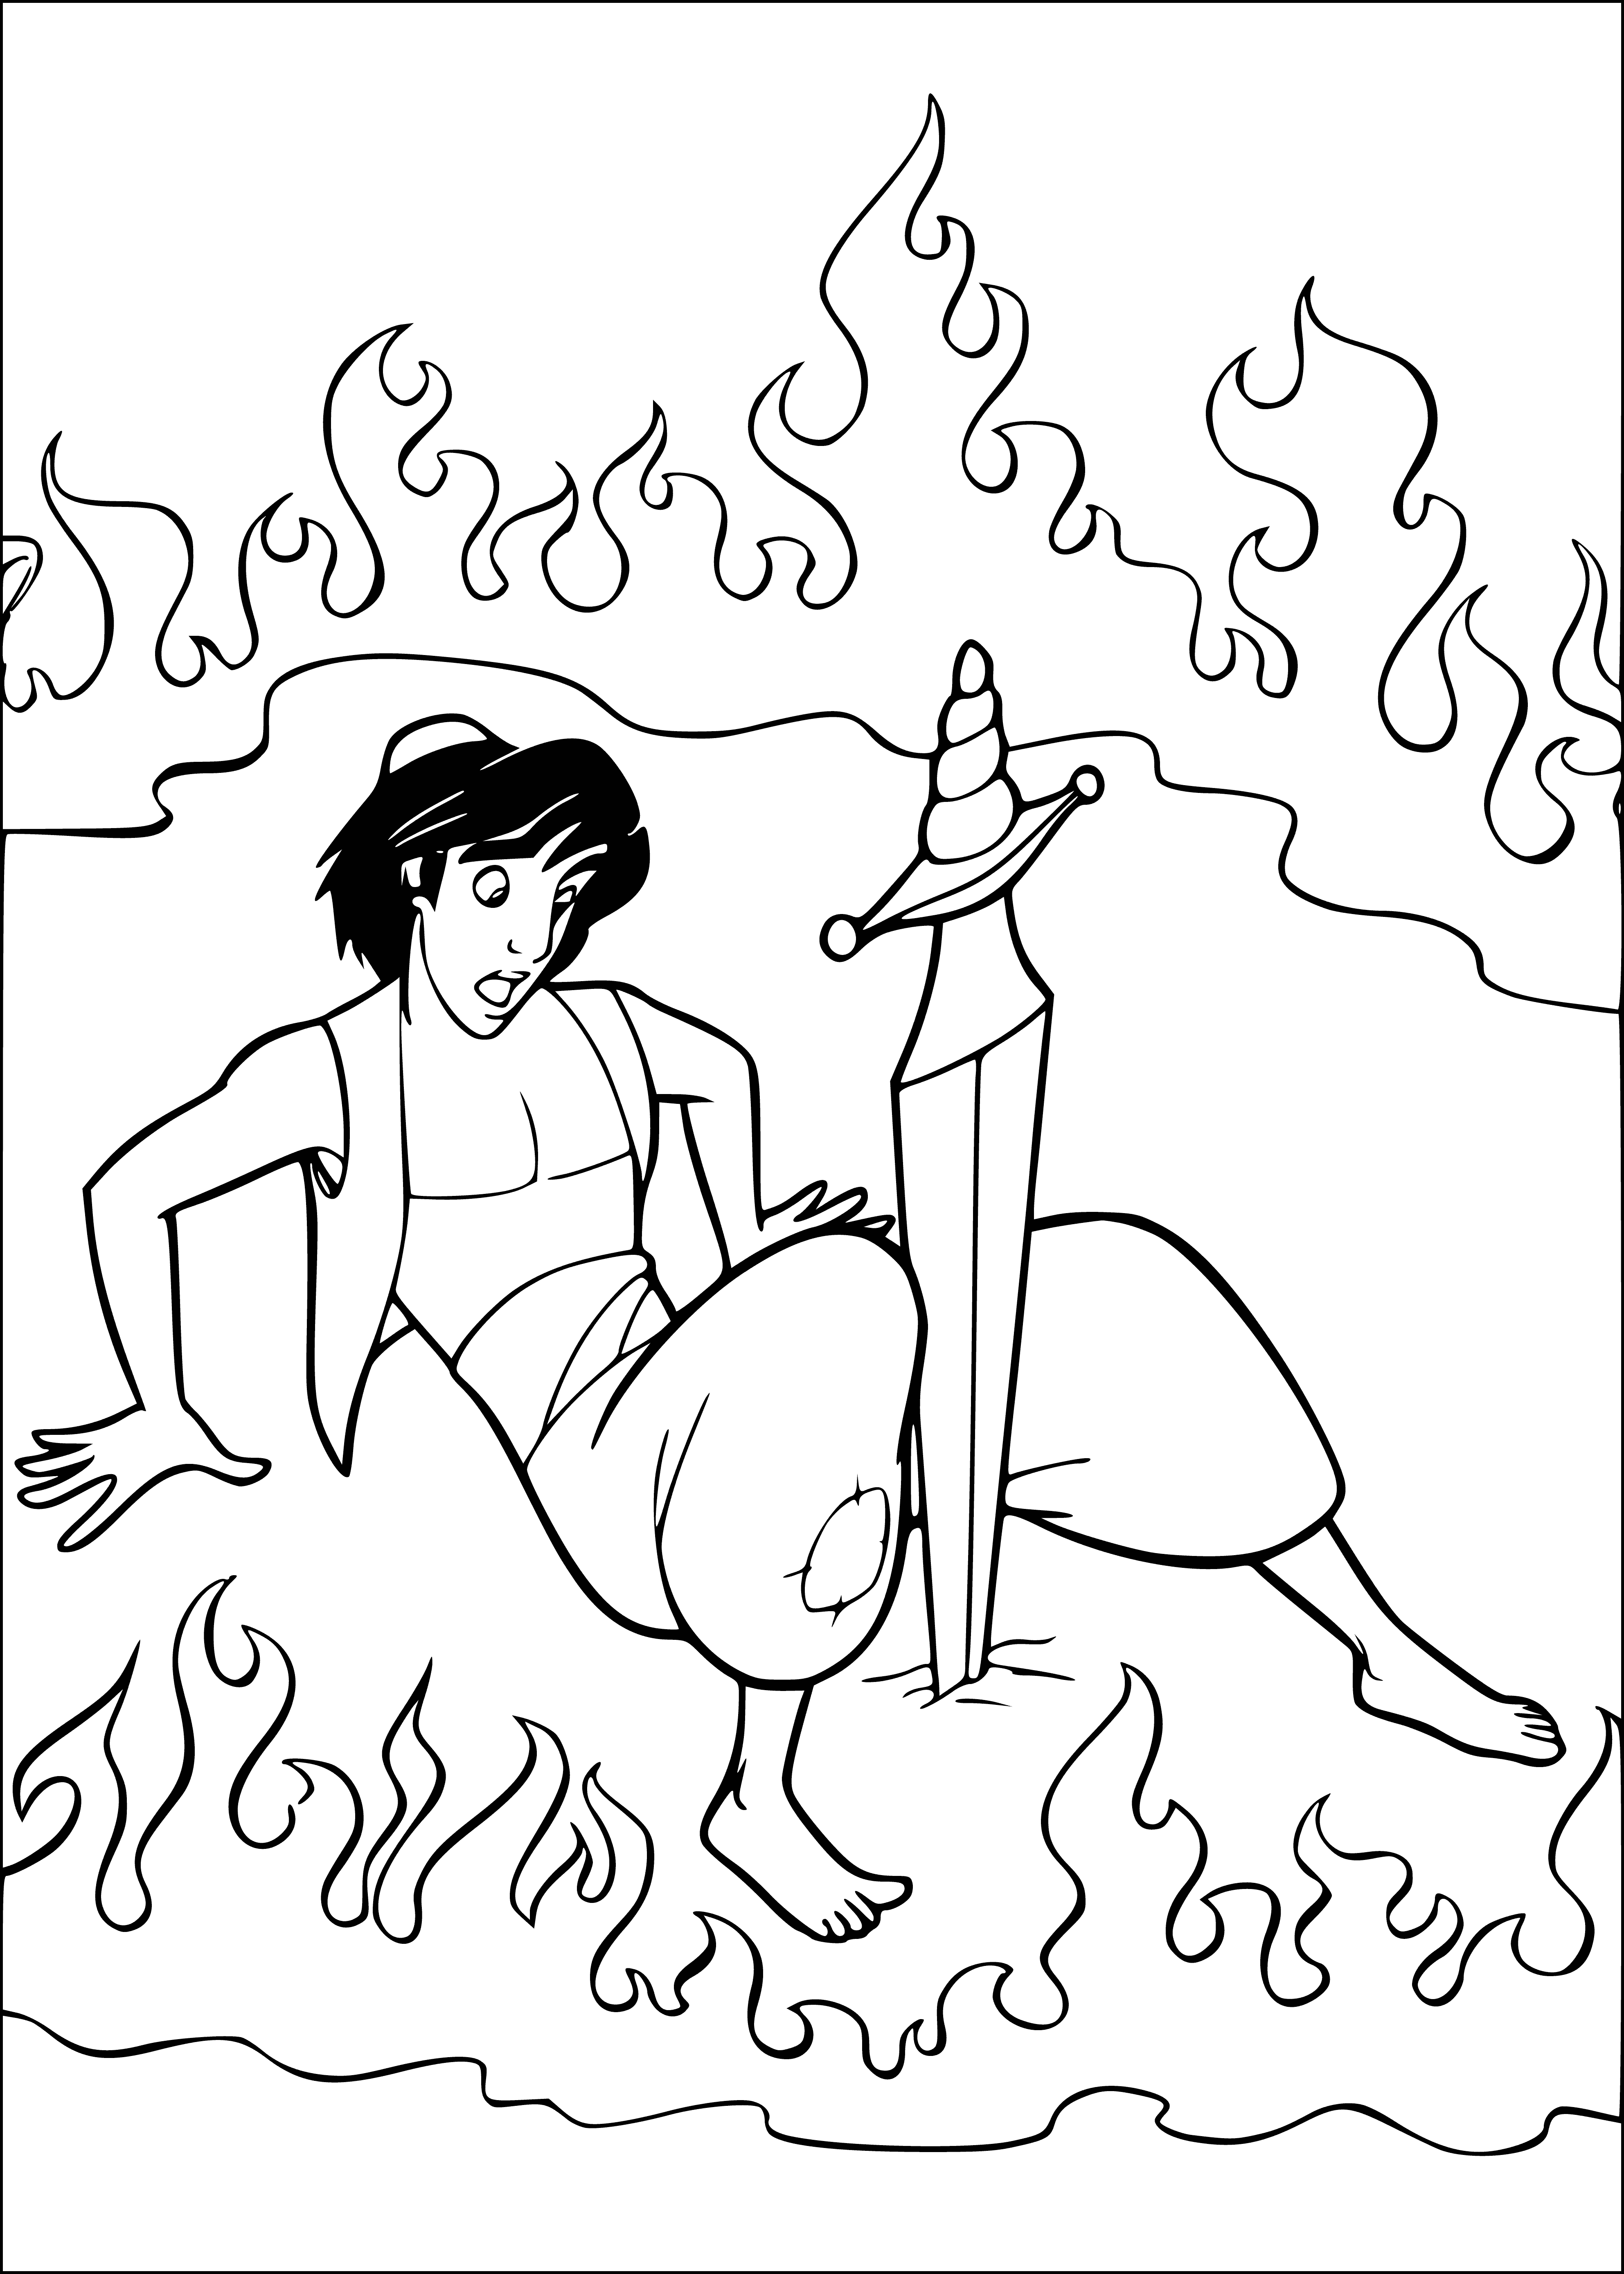 Aladdin on fire coloring page